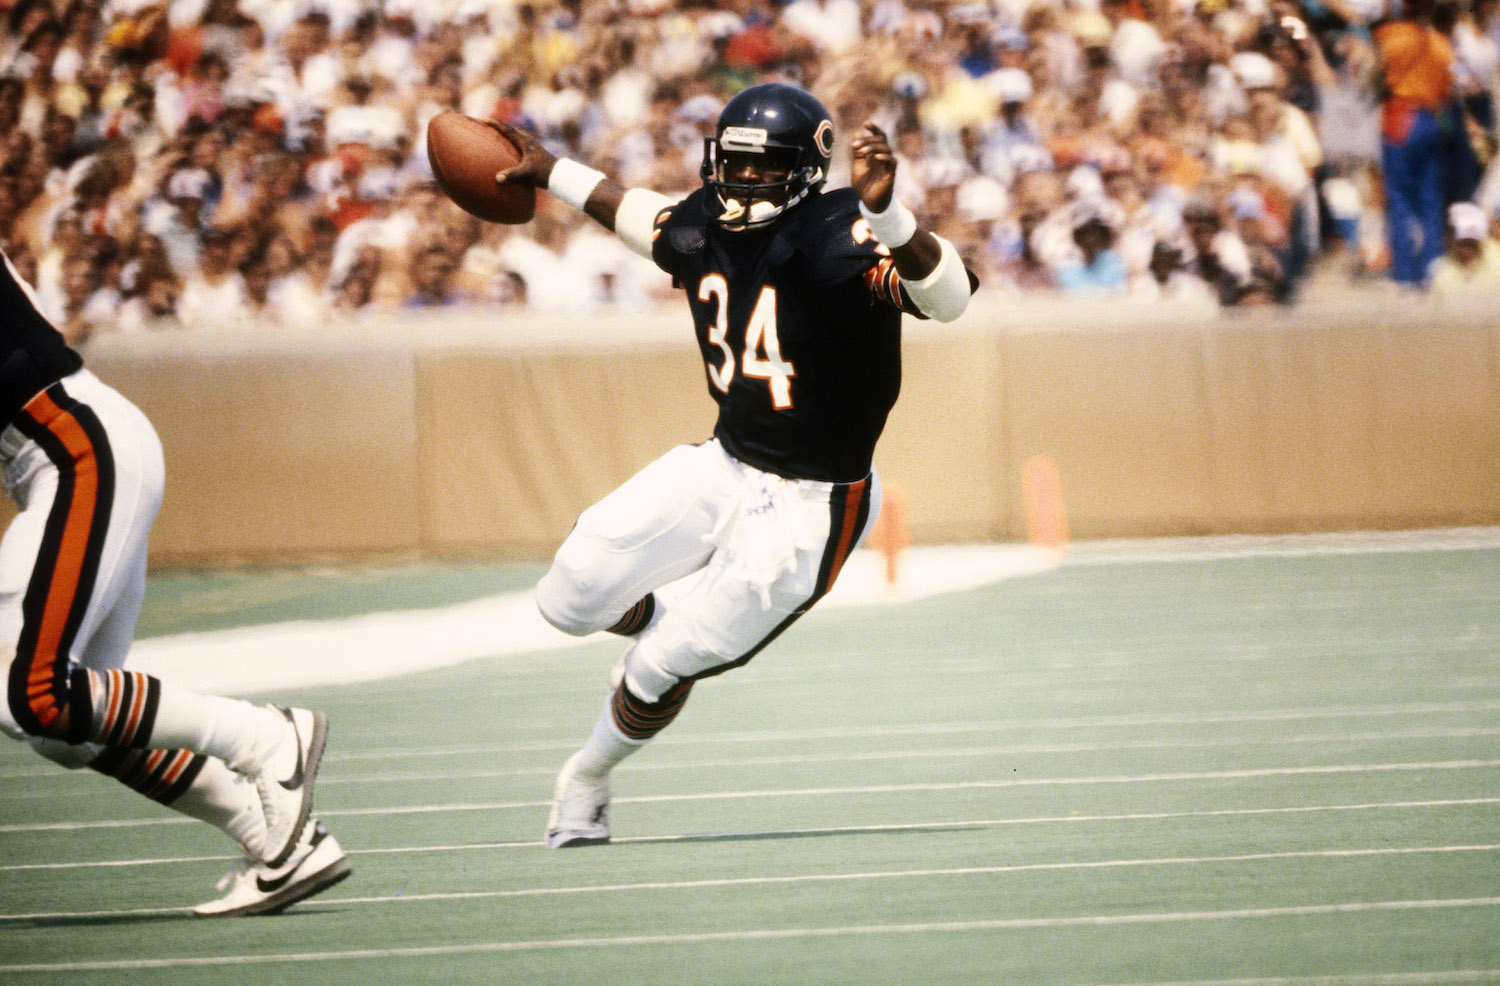 Walter Payton has fourth-most rushing yards on Thanksgiving Day.